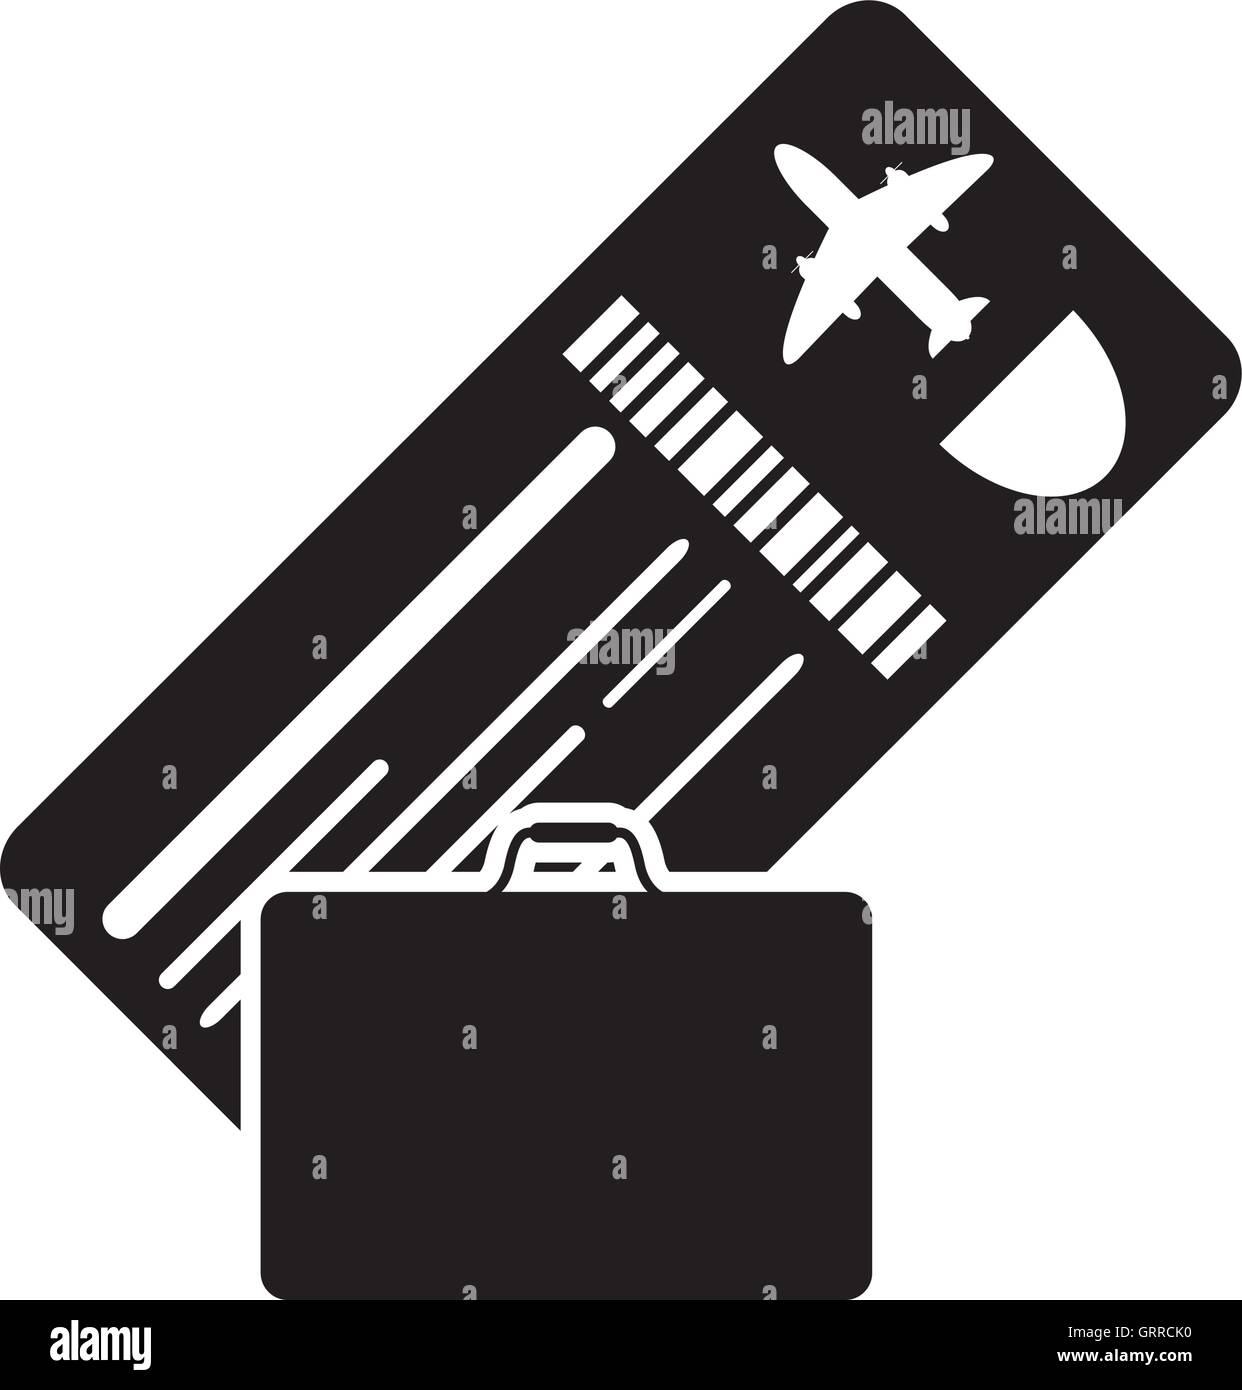 boarding pass or ticket and suitcase icon Stock Vector